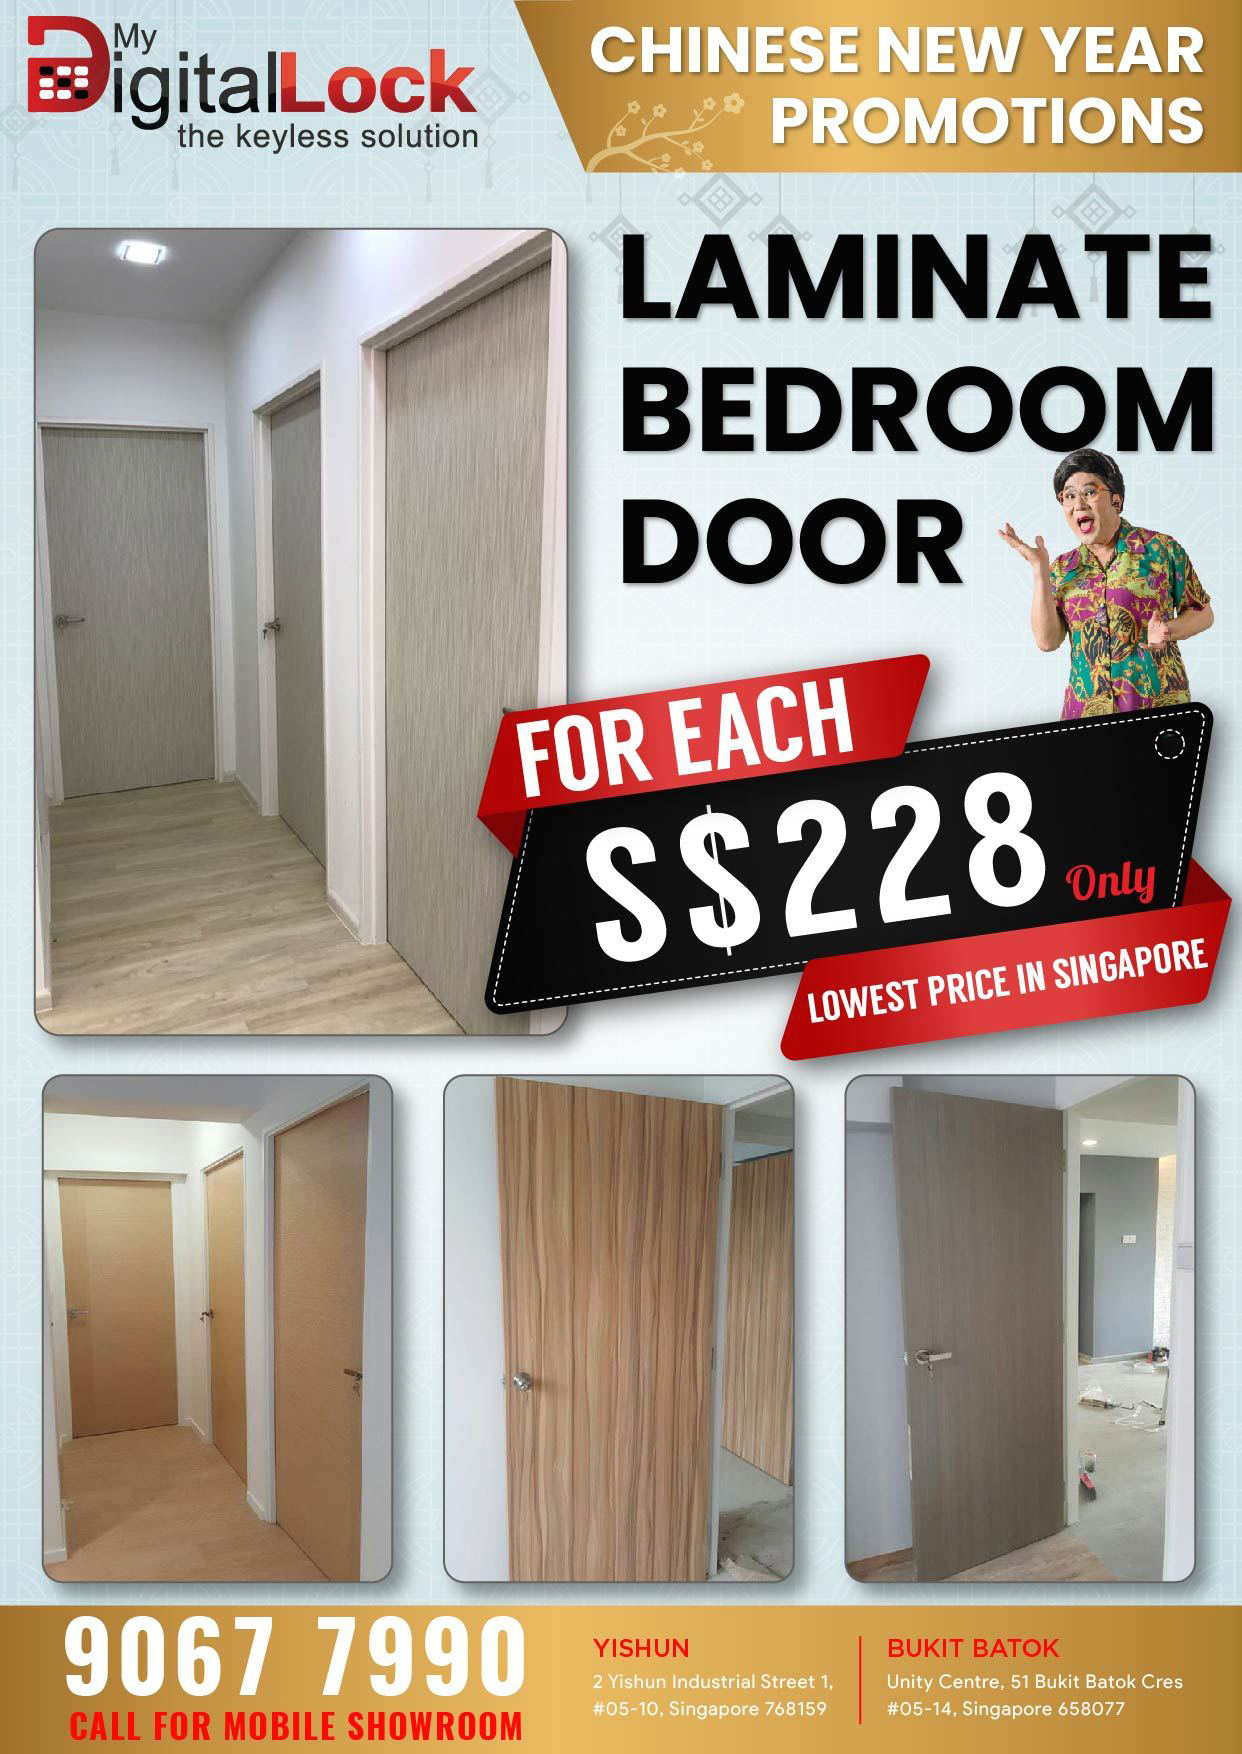 Hdb Fire Rated Main Door Factory Selling Keywe Epic And